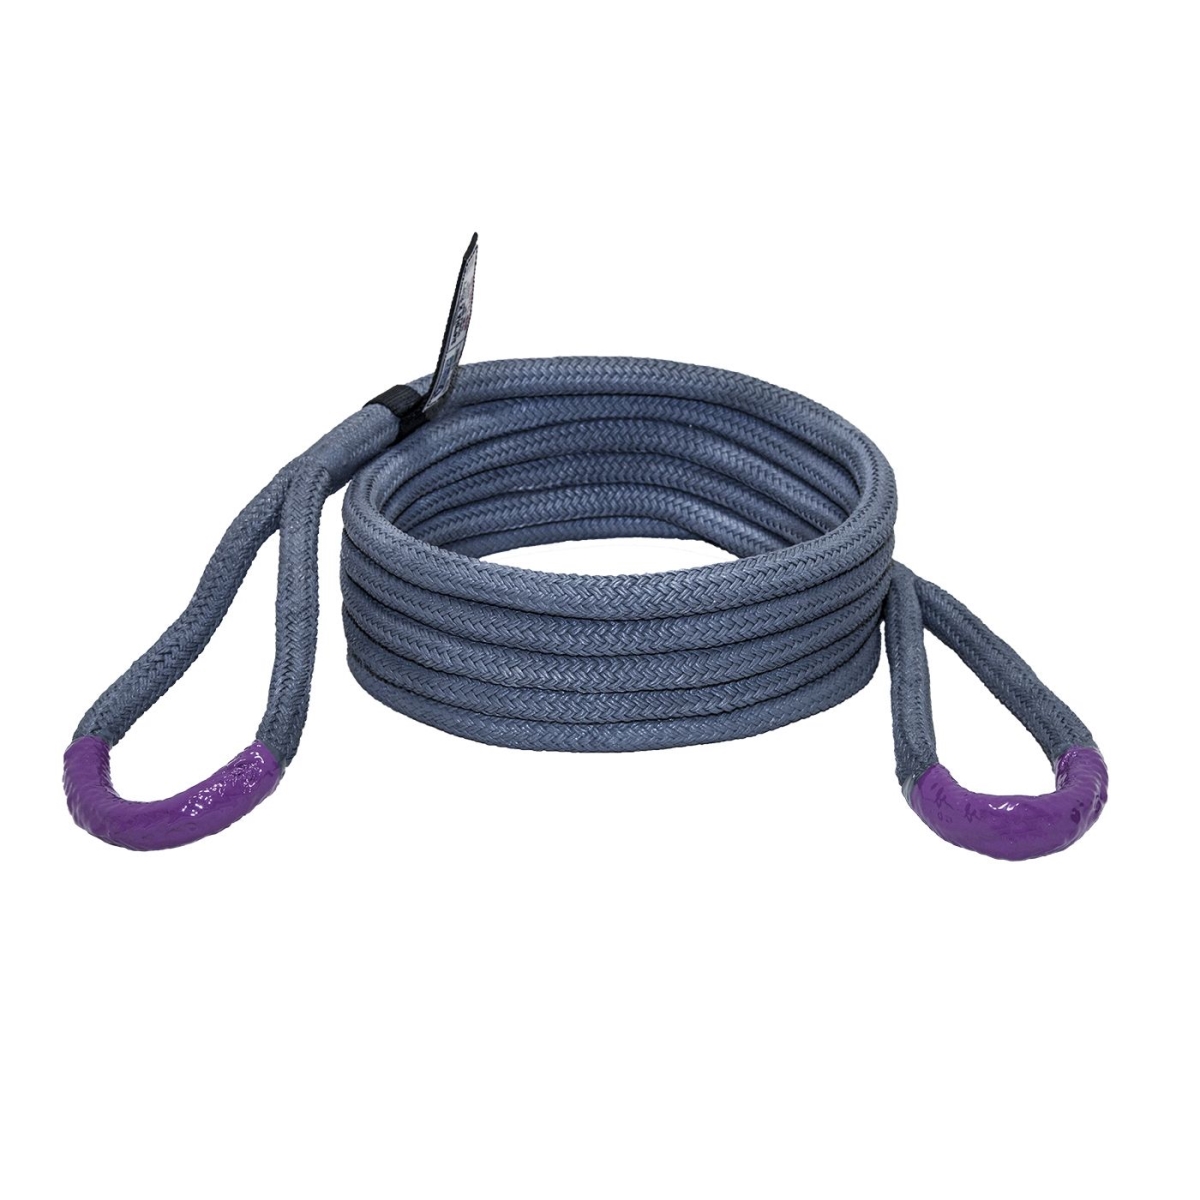 Picture of Yukon Gear & Axle YUK-2-YRGRR-02 0.75 in. dia. 19000 PSI Rating 20 ft. Long Kinetic Recovery Rope